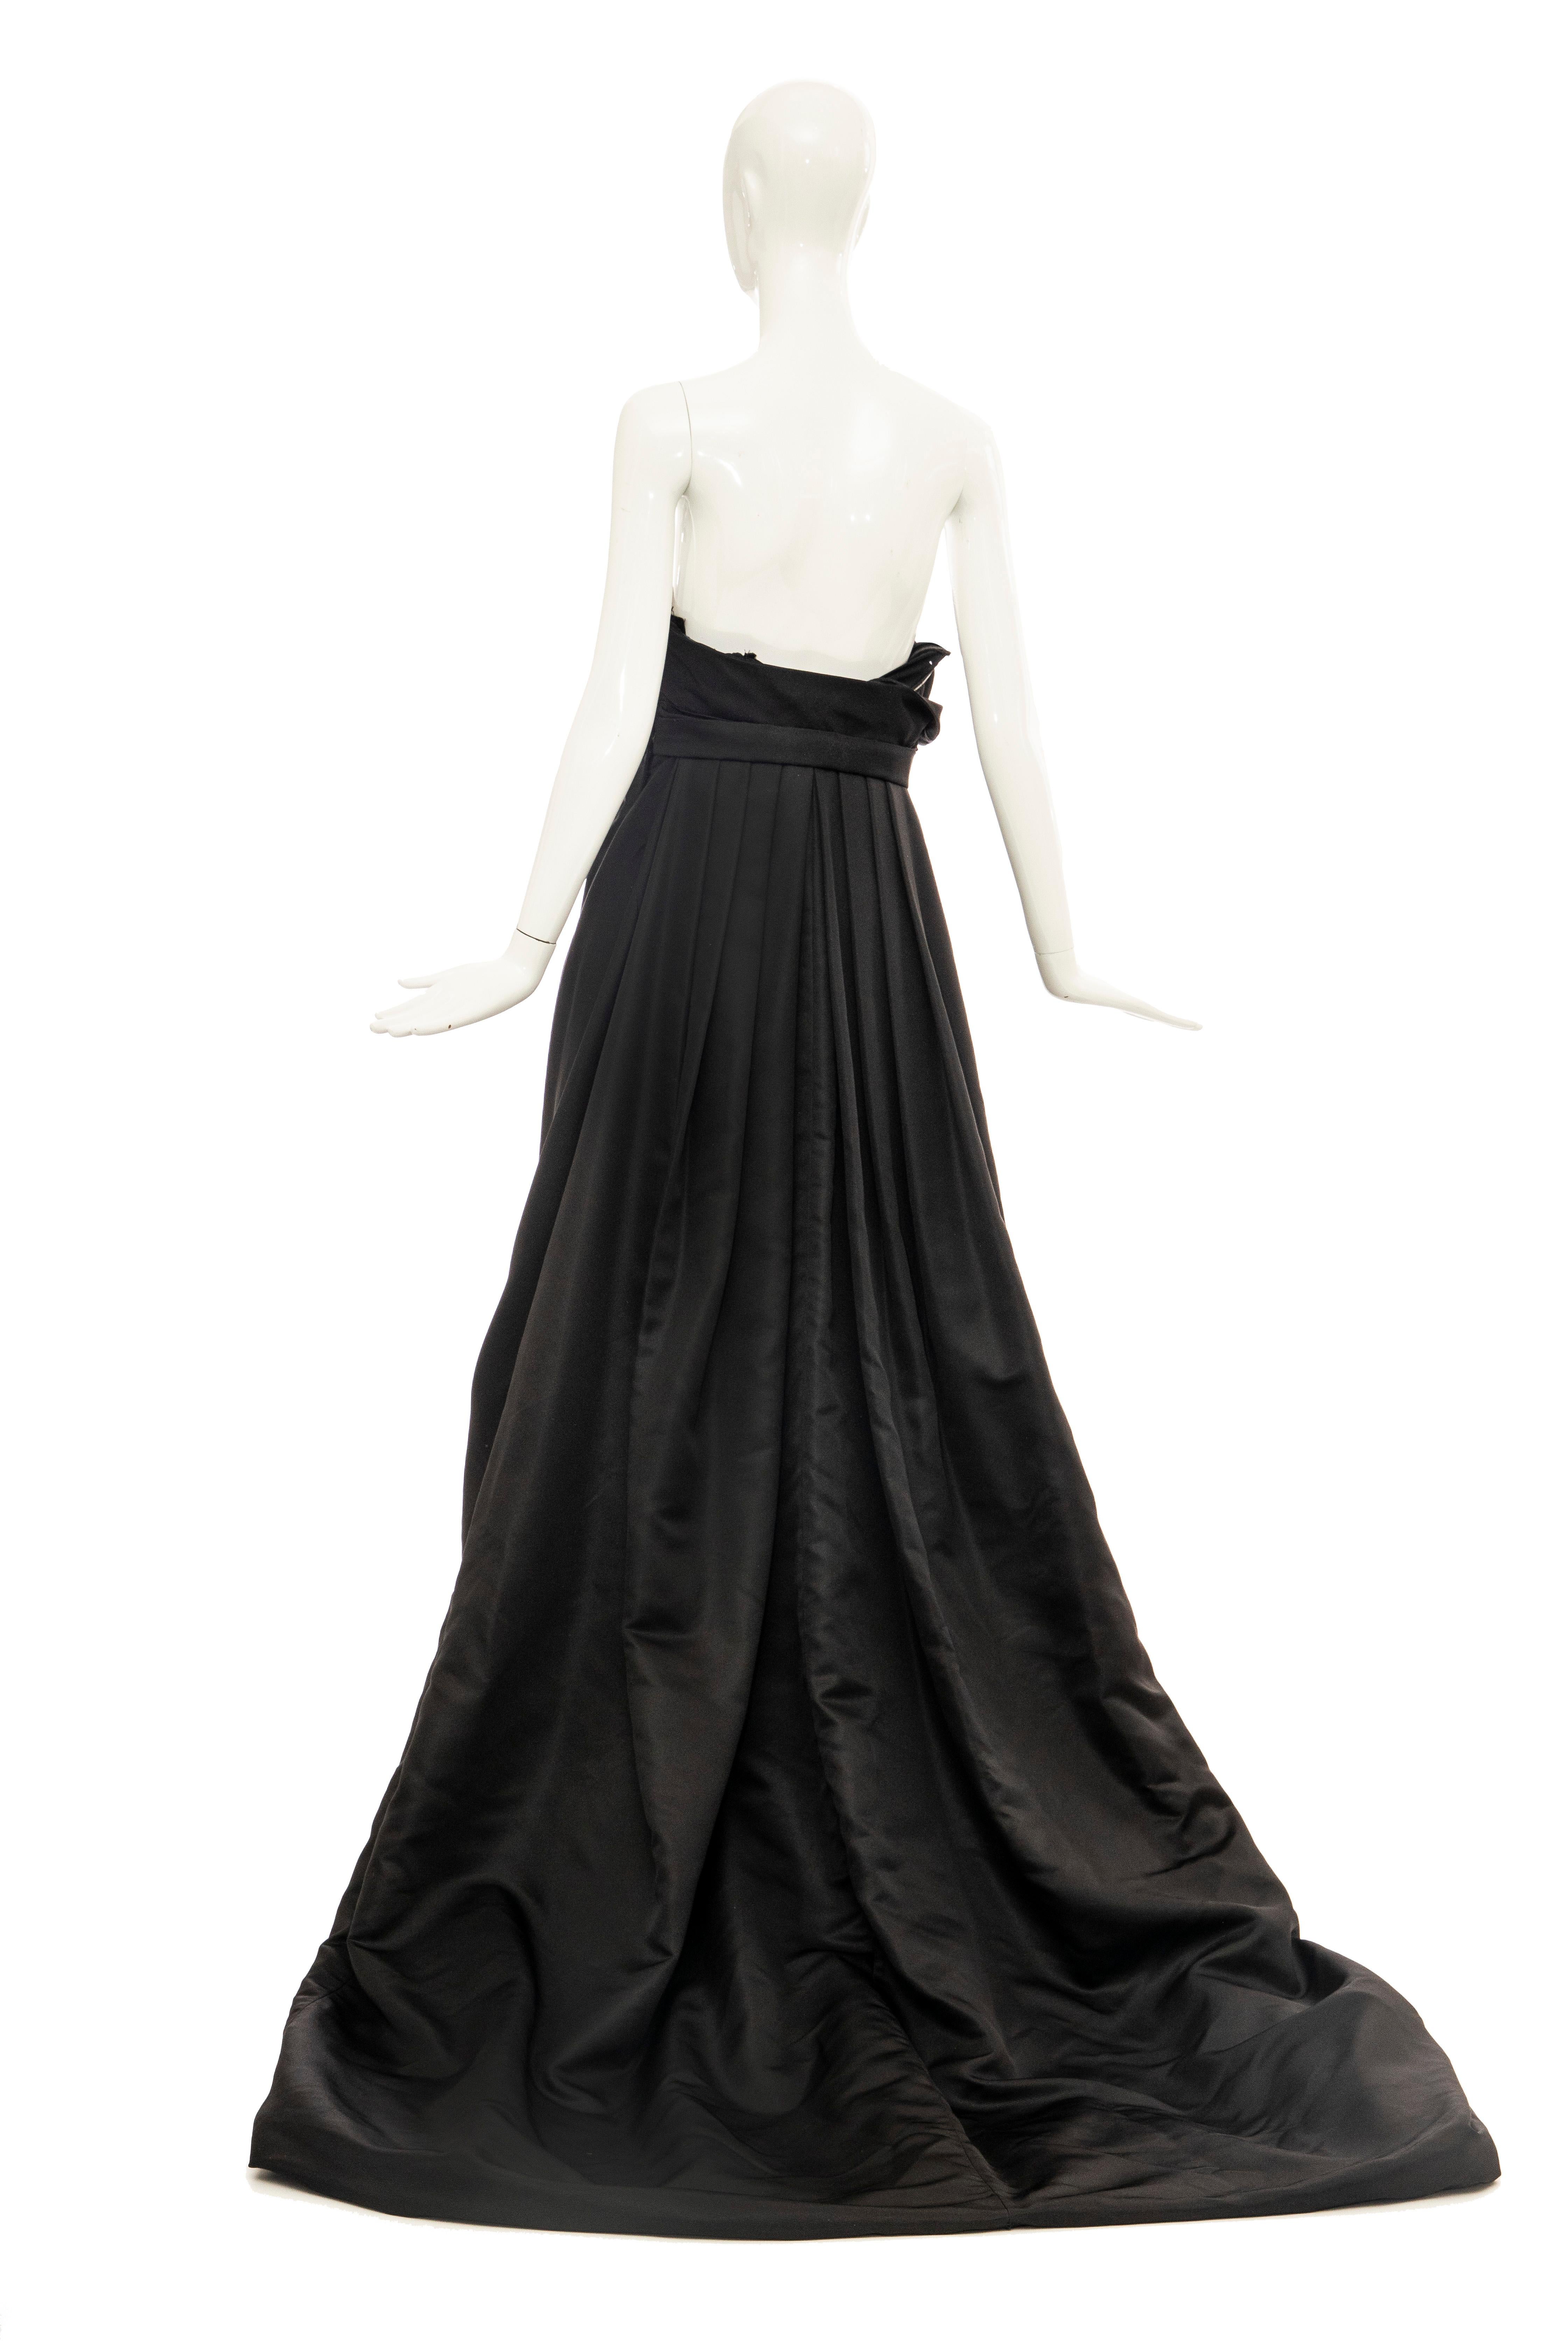 Christian Dior by John Galliano Black Silk Strapless Gown, Fall 2008 For Sale 5